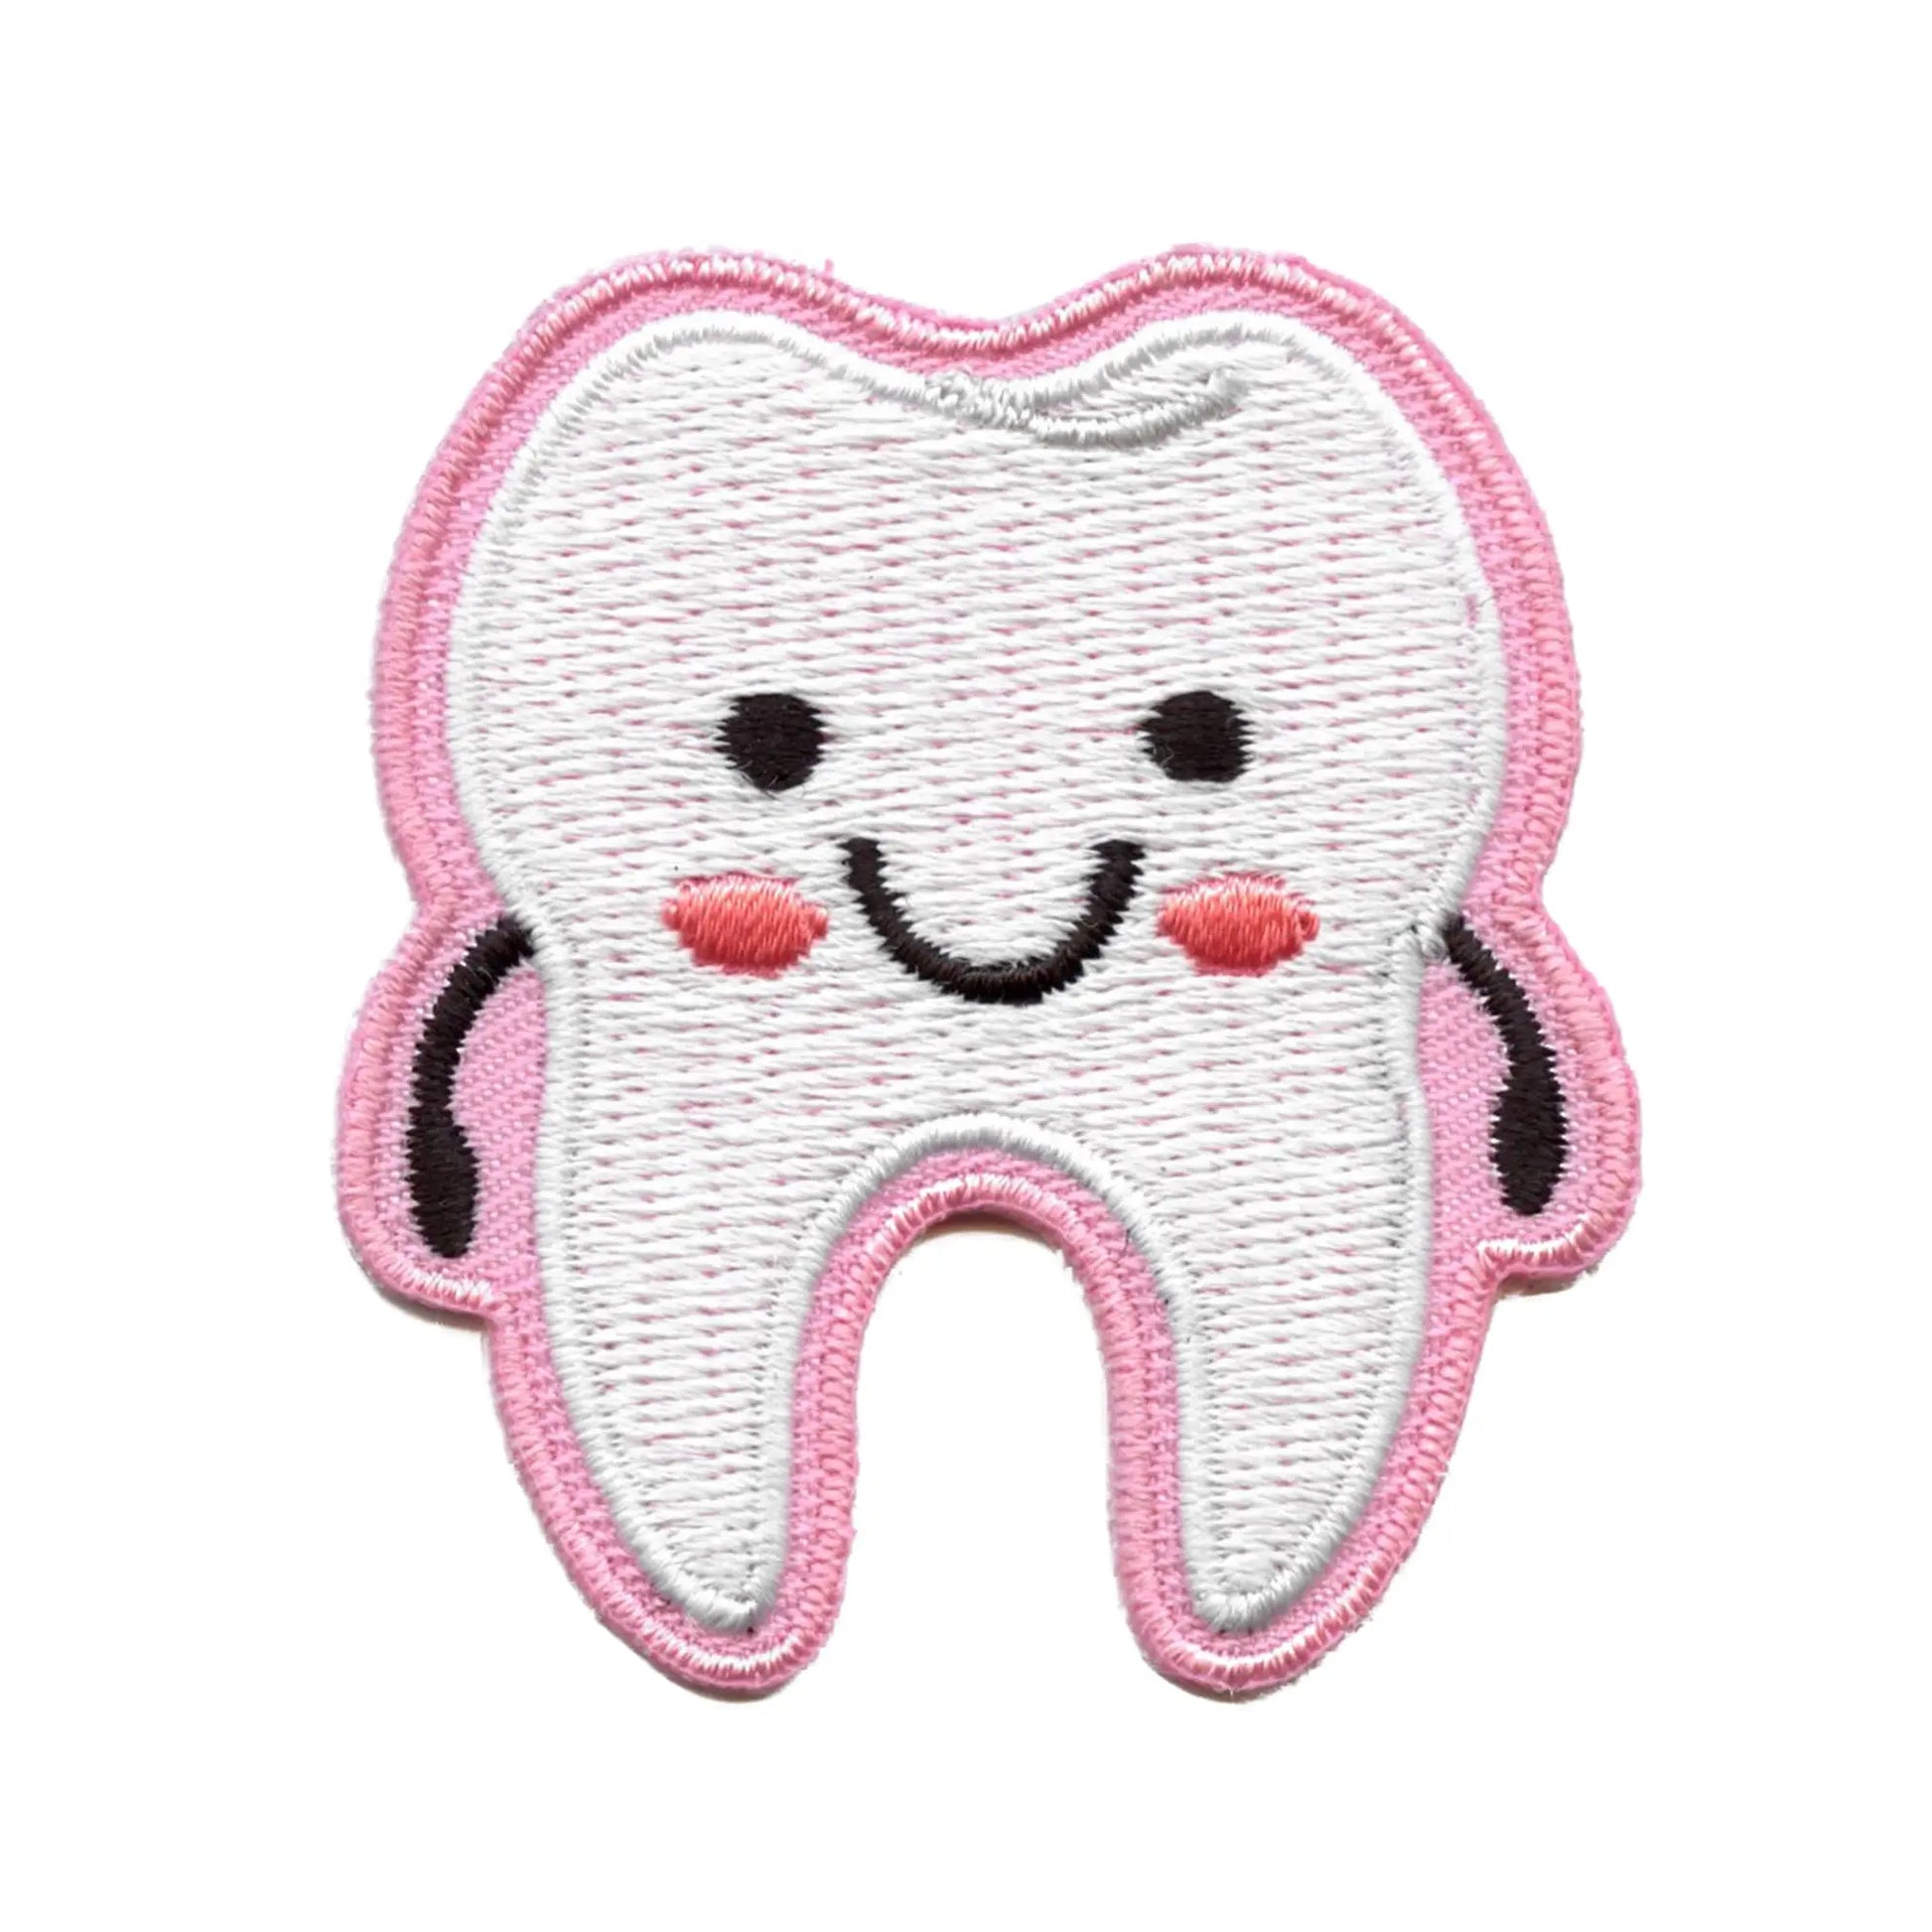 Happy Smiling Tooth Patch Science Anatomy Health Embroidered Iron On 